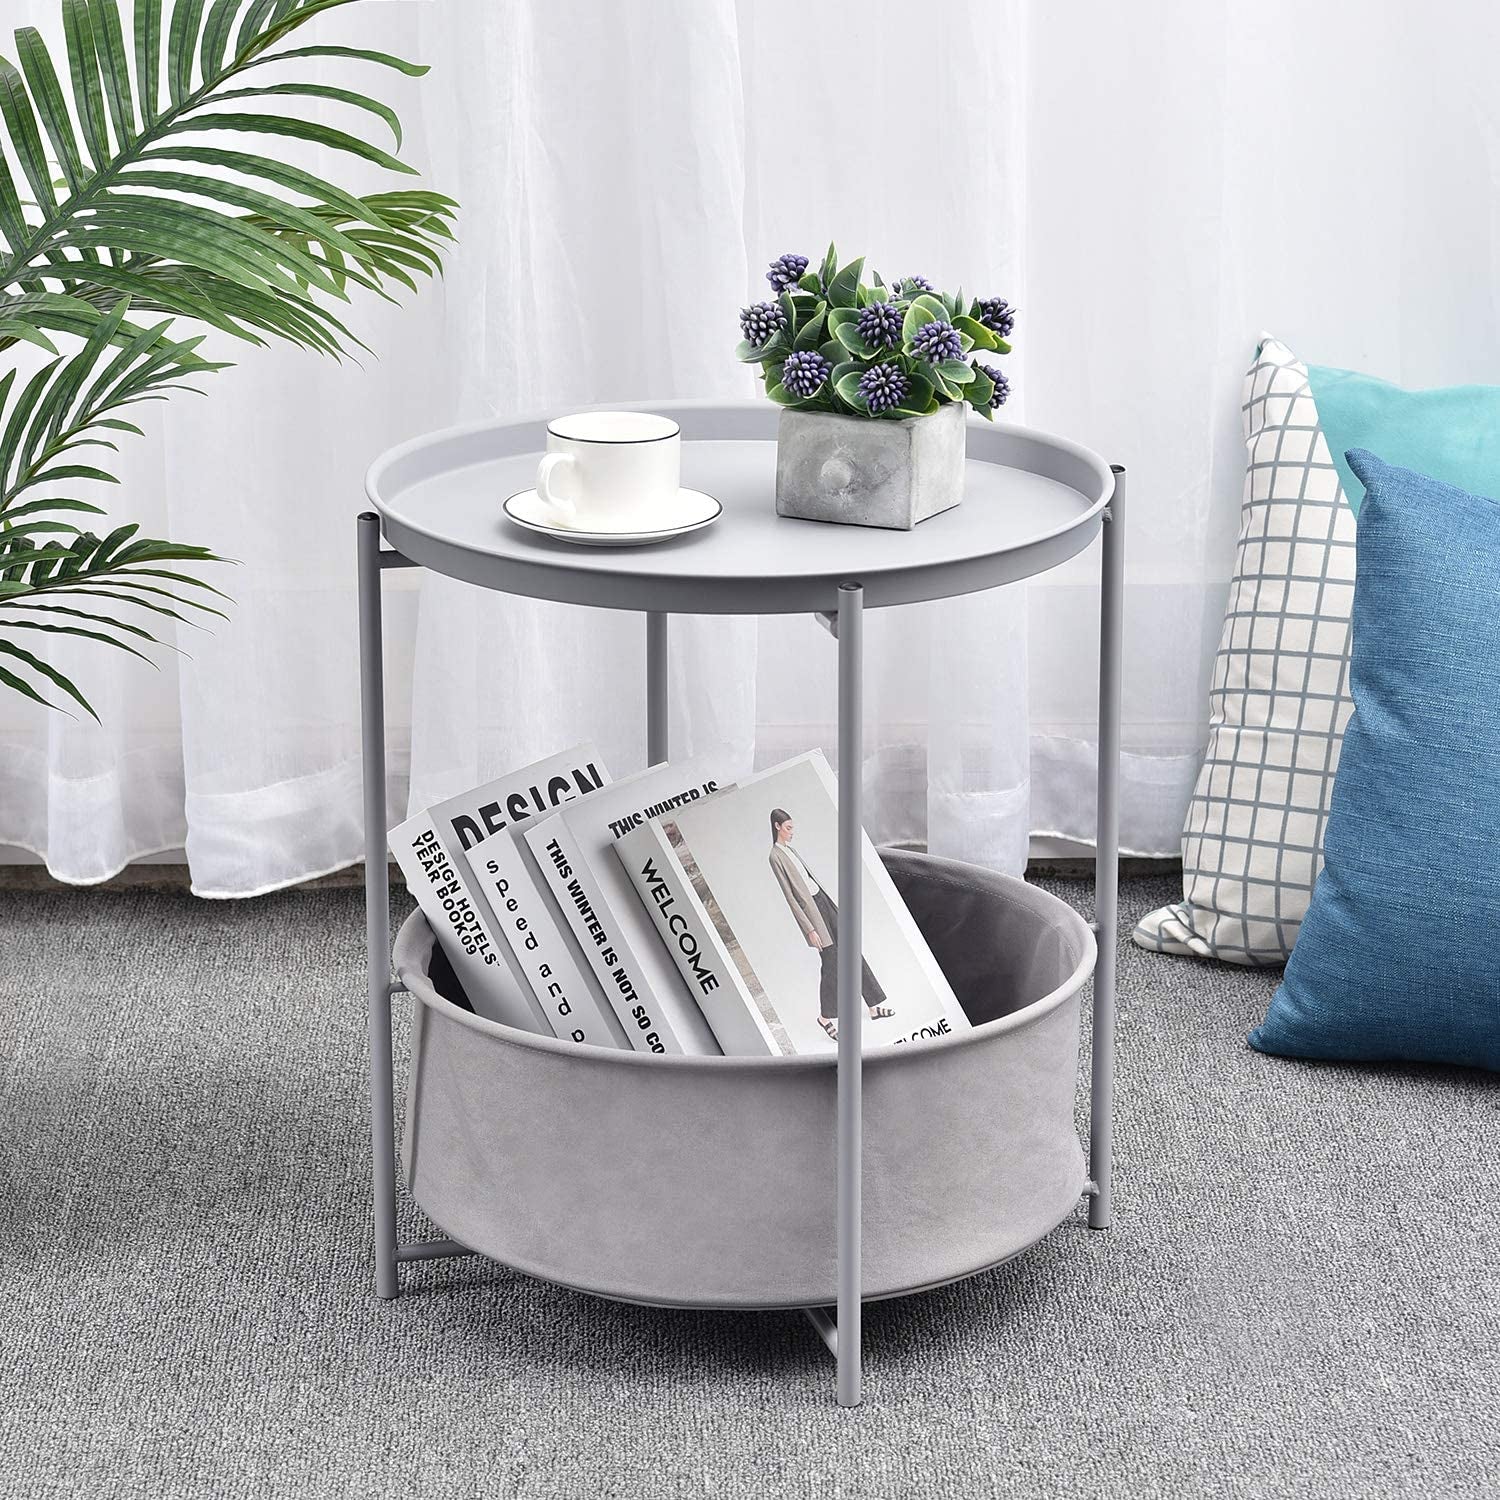 Coffee round Table, Metal Nightstand, Sofa Side Snack Table, Bedside End Table with Detachable Tray Top and Fabric Storage Basket, Scandi Style Lamp Table for Living Room Bedroom (Light Grey)